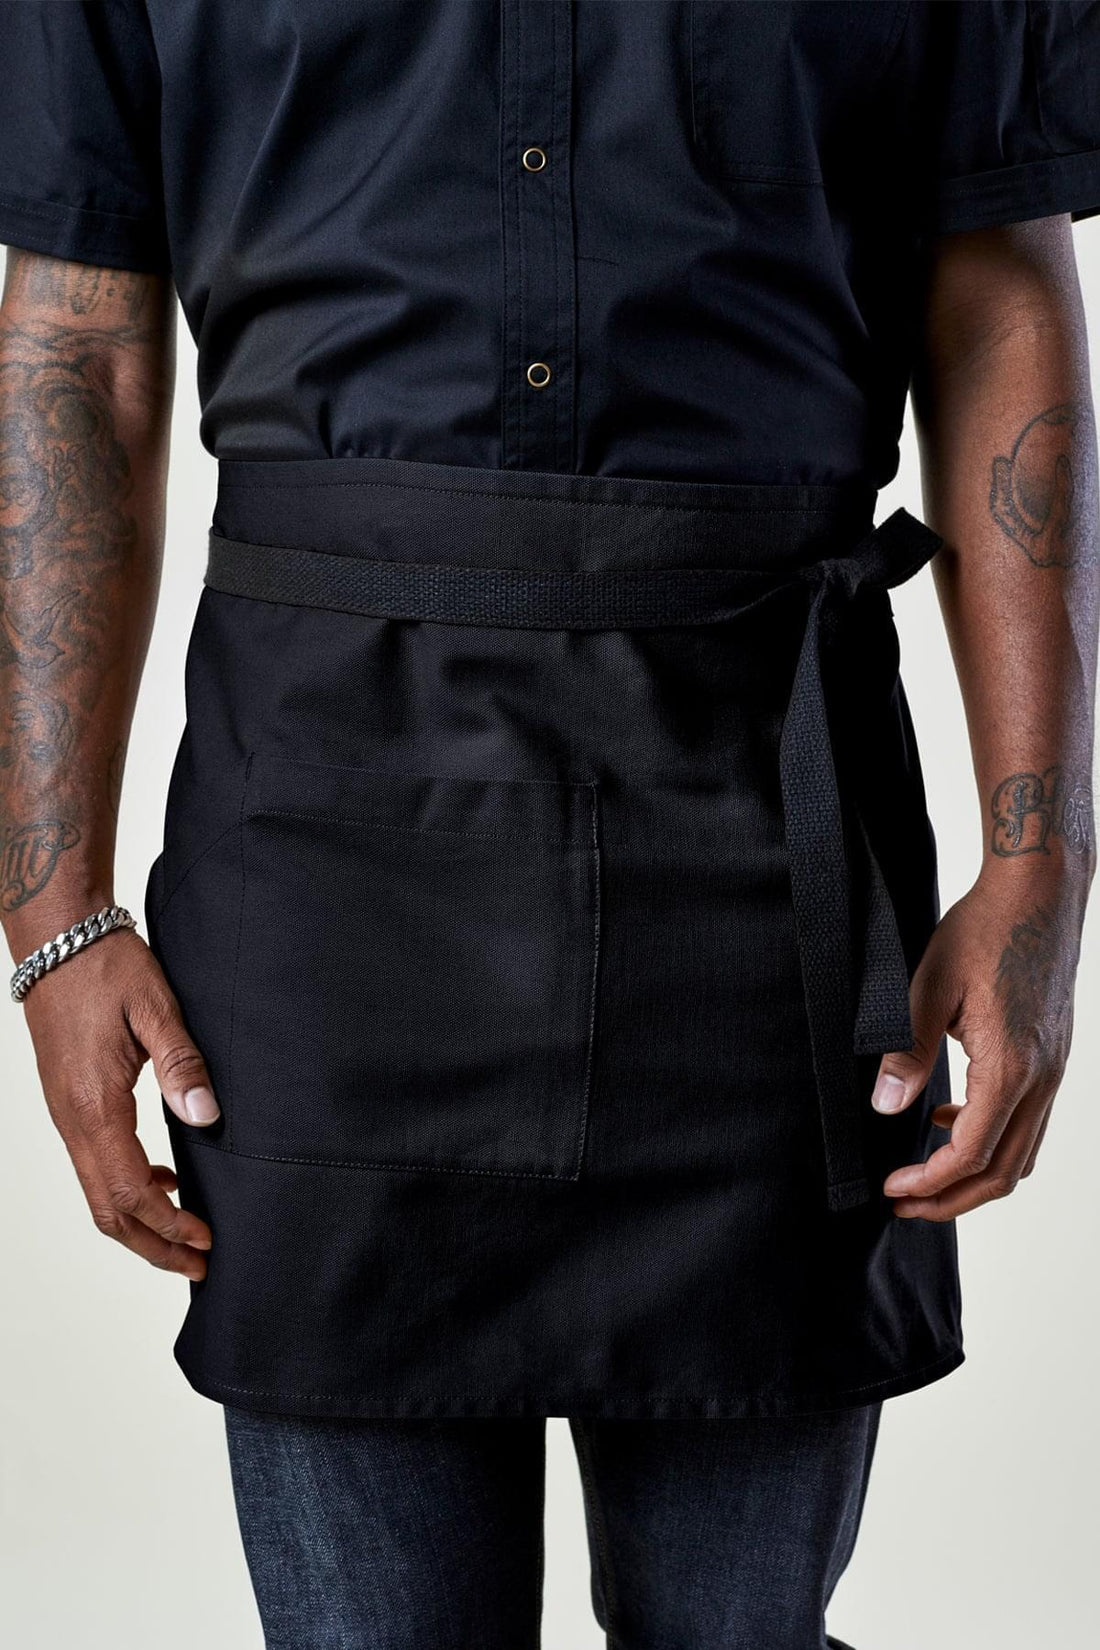 Image of person wearing Briston Waist Apron in Black Canvas. | BlueCut Aprons				